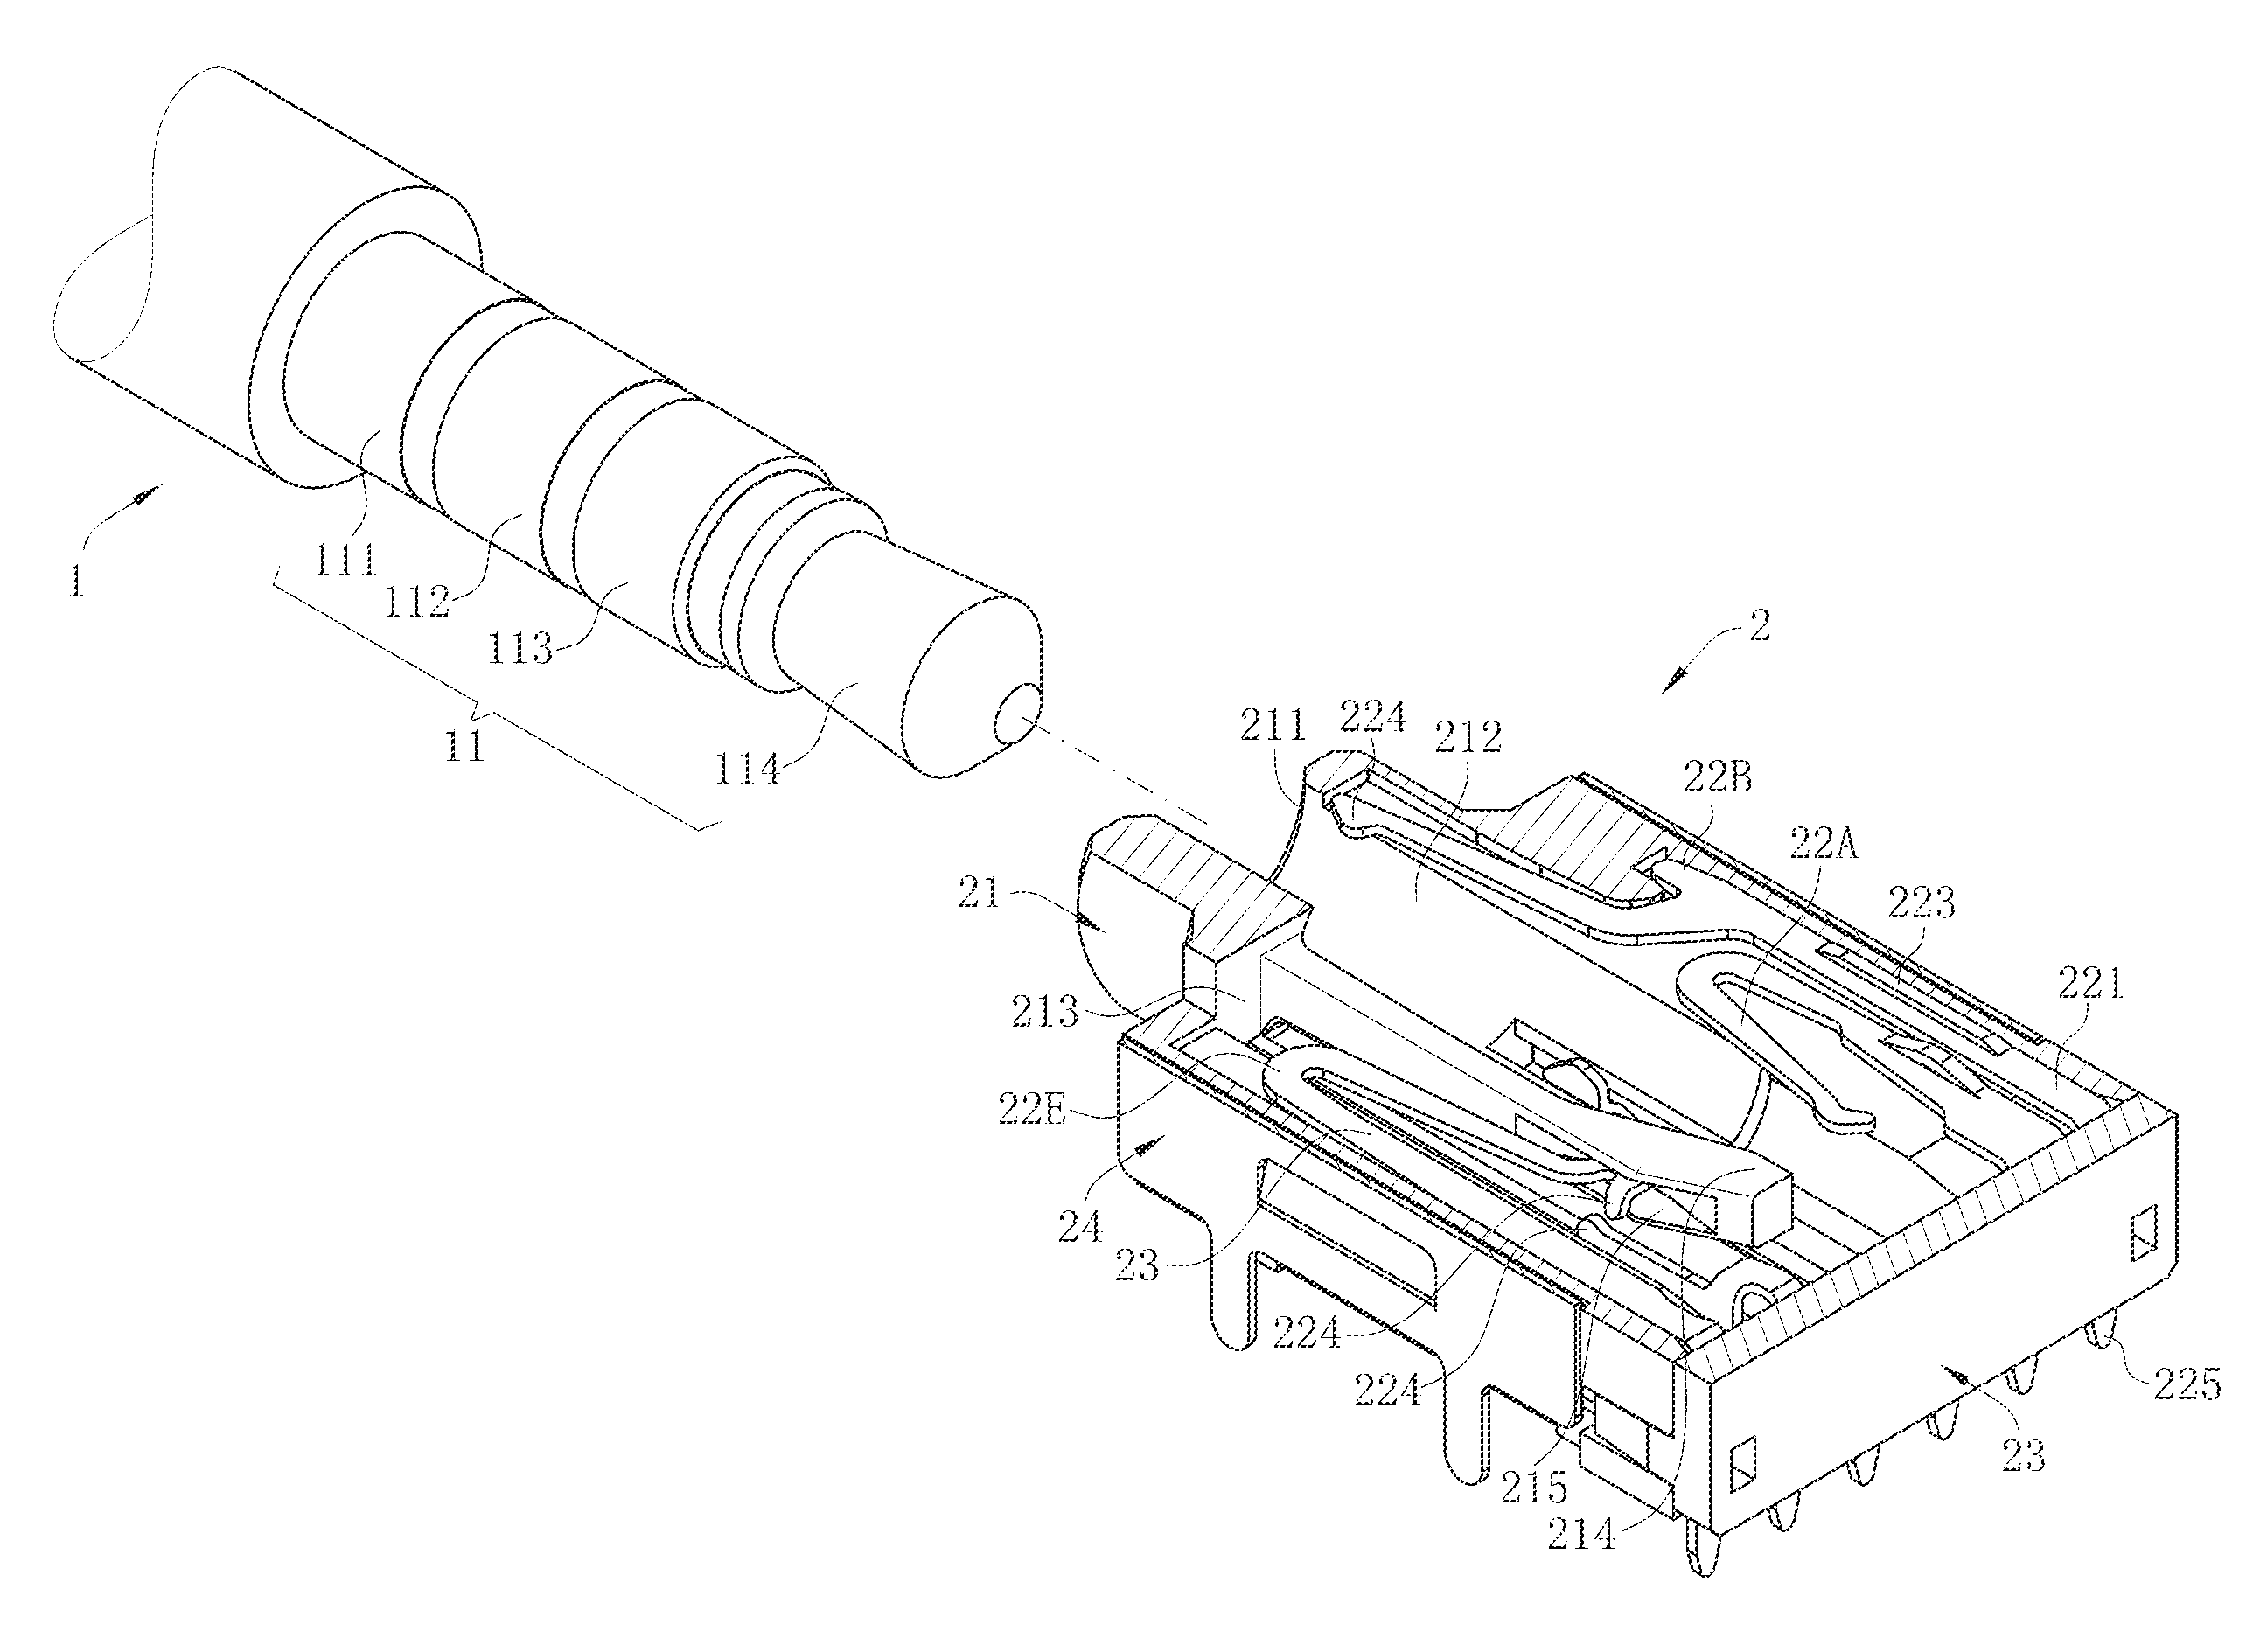 Receptacle connector